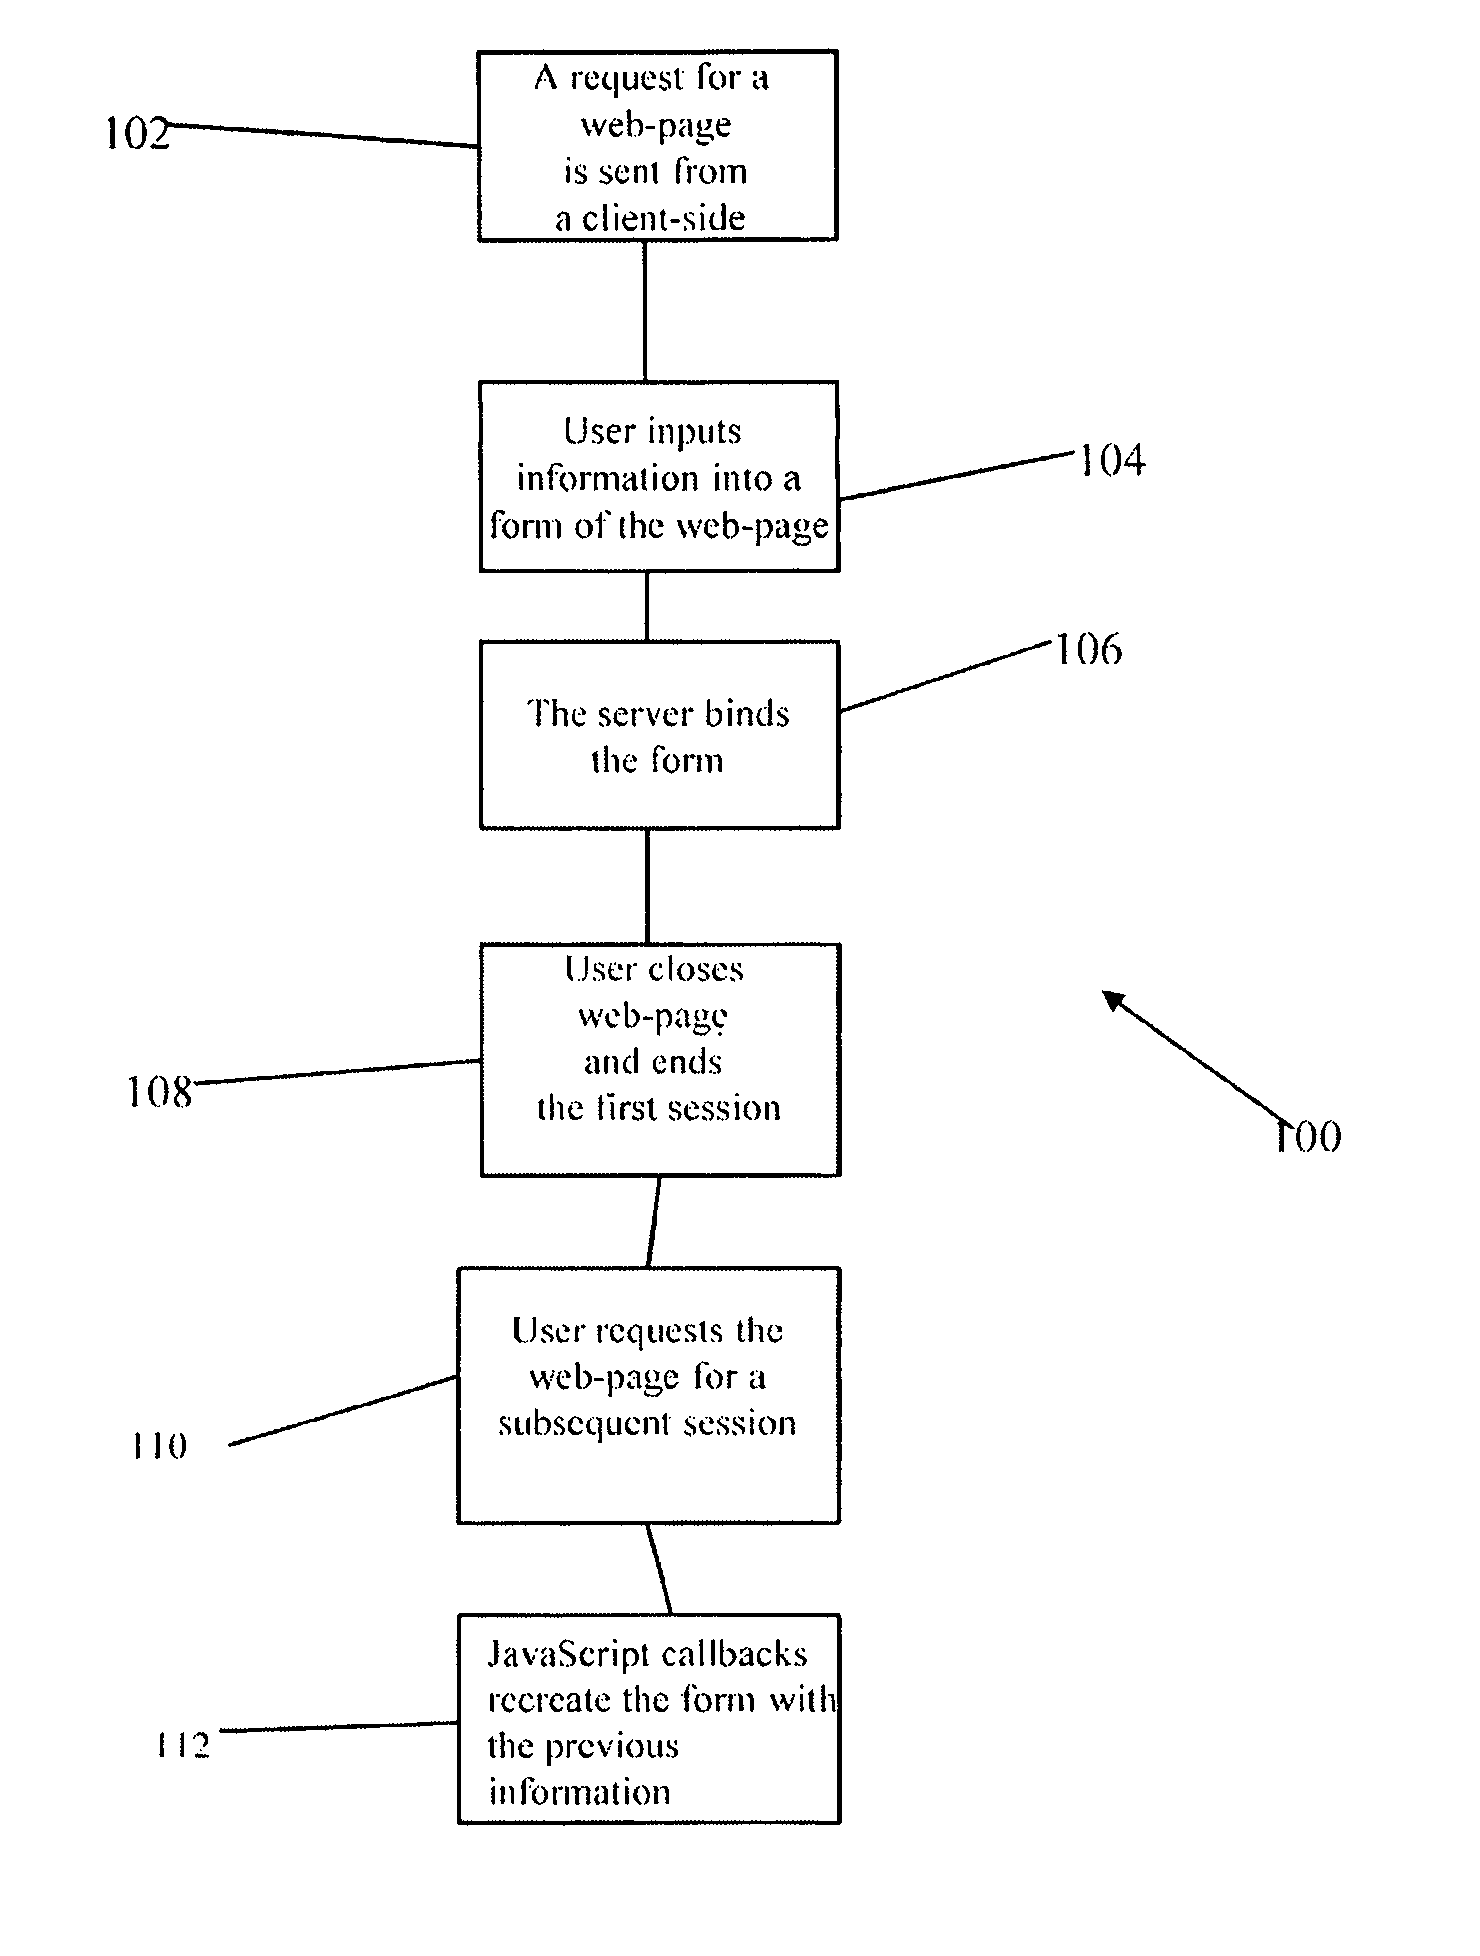 System and method for binding a document object model through JavaScript callbacks